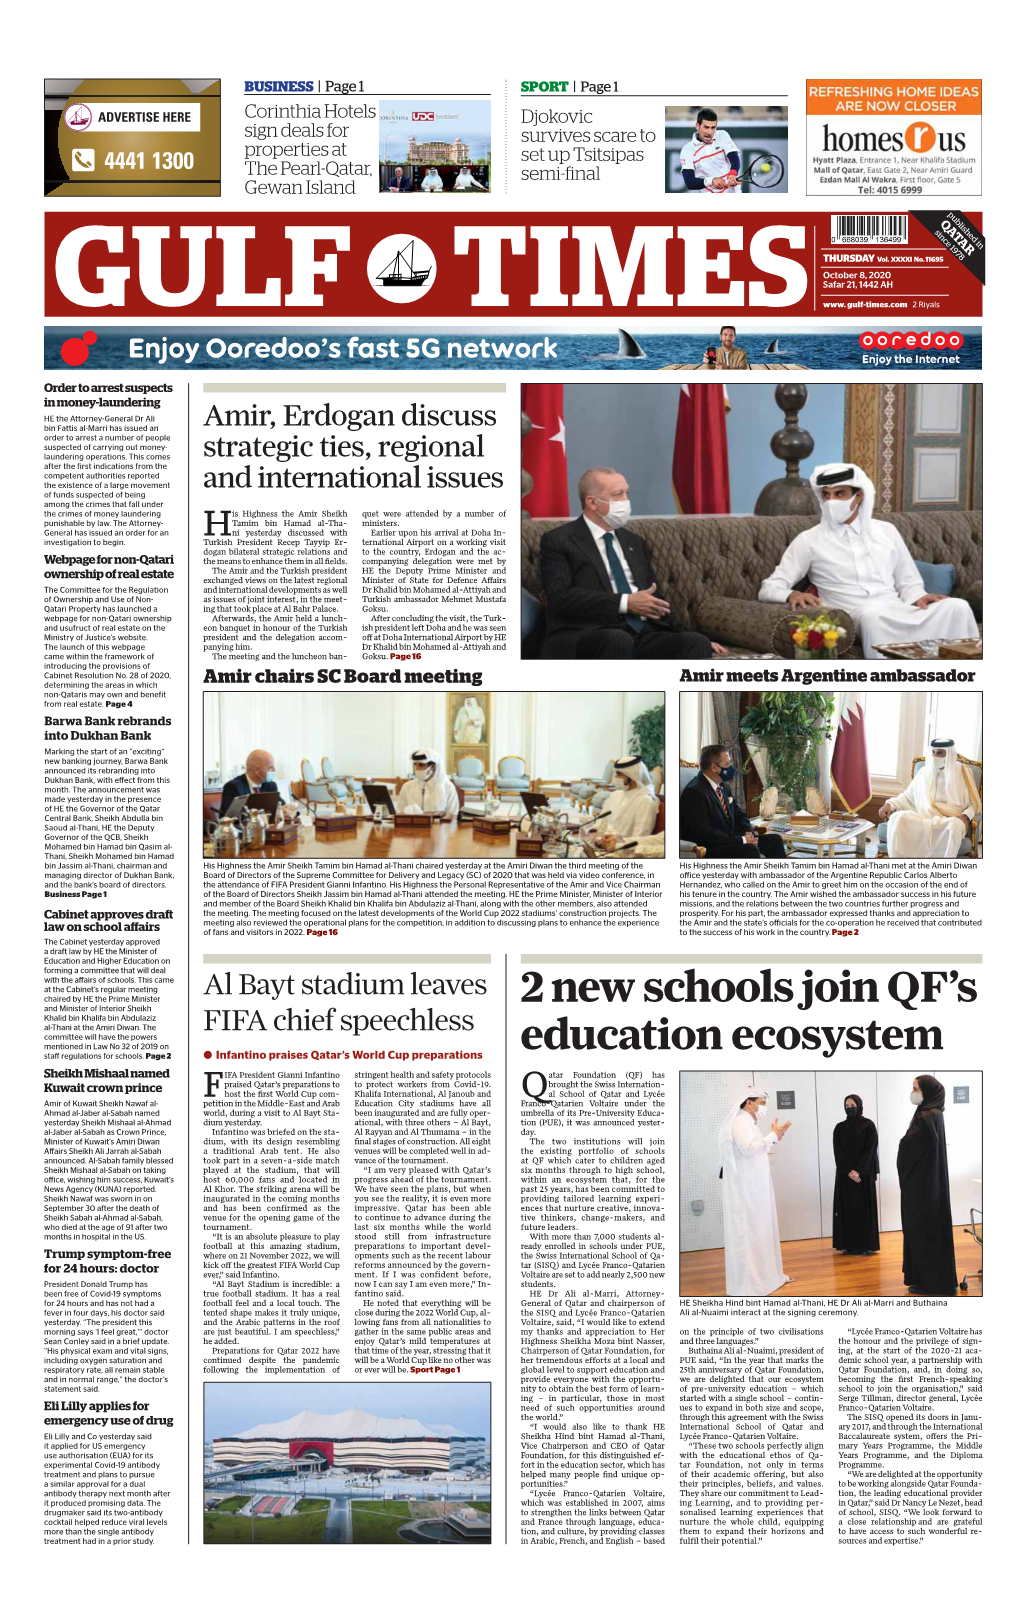 2 New Schools Join QF's Education Ecosystem